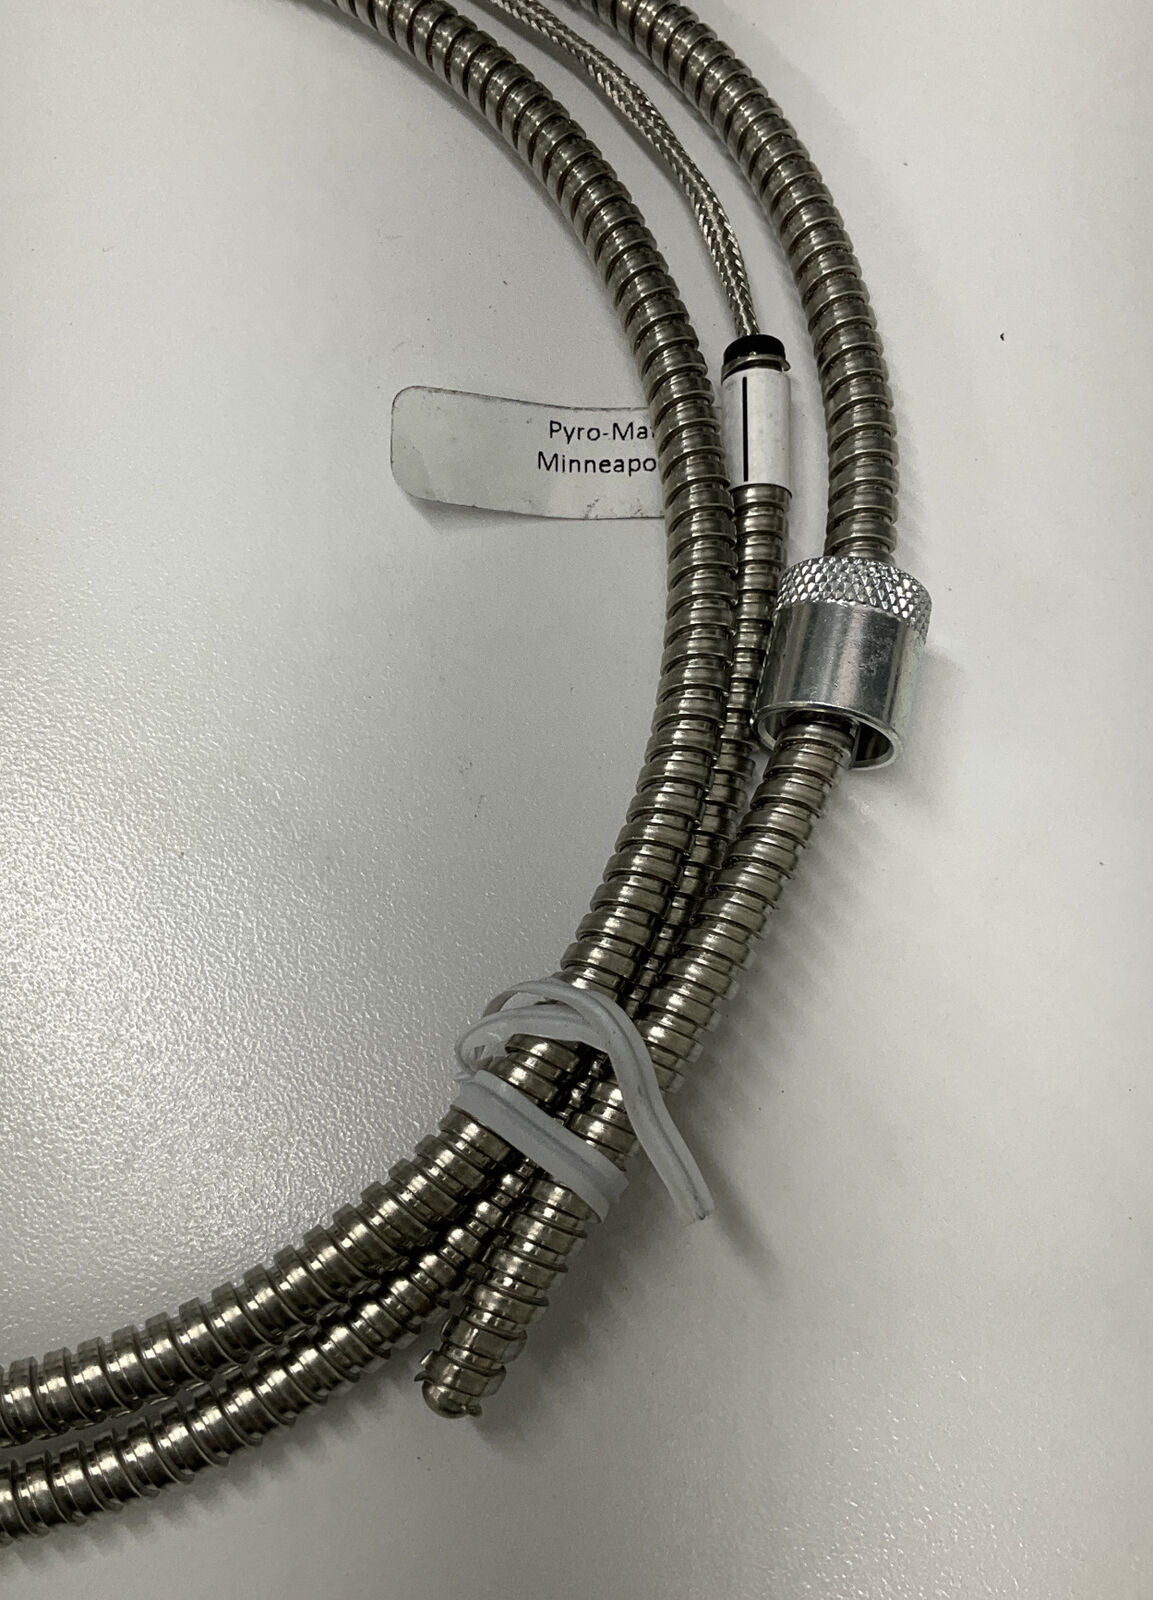 Pyromatic Thermocouple Cable PCJ0G-100A-804B (GR182)